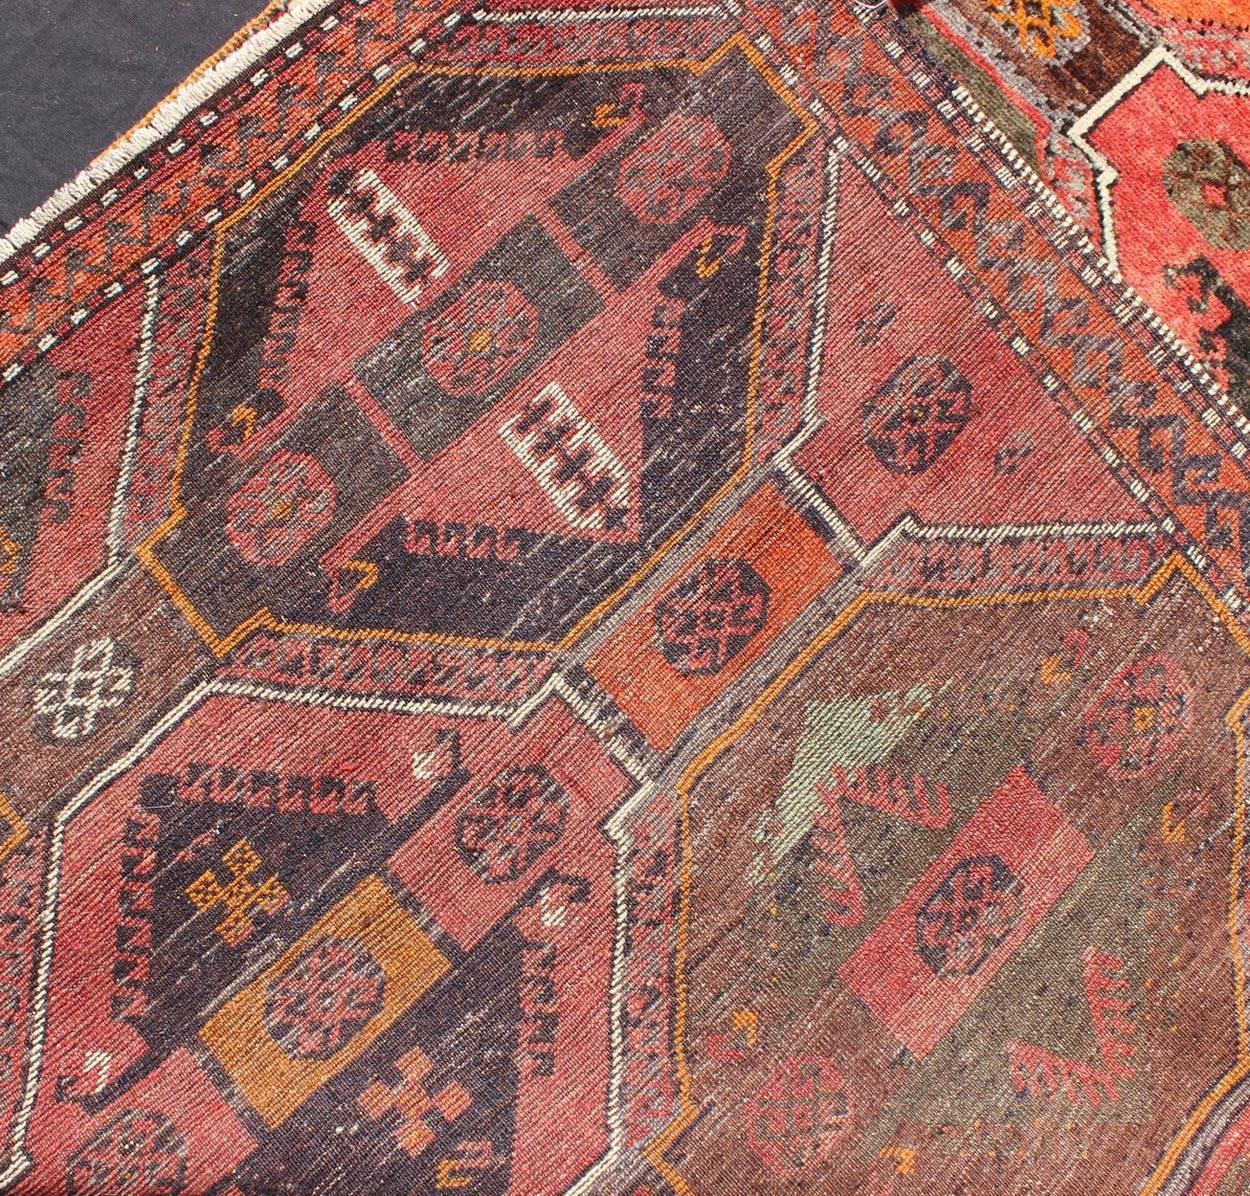 Geometric Medallions Vintage Tribal Oushak Rug in Red, Orange, Charcoal & Brown In Excellent Condition For Sale In Atlanta, GA